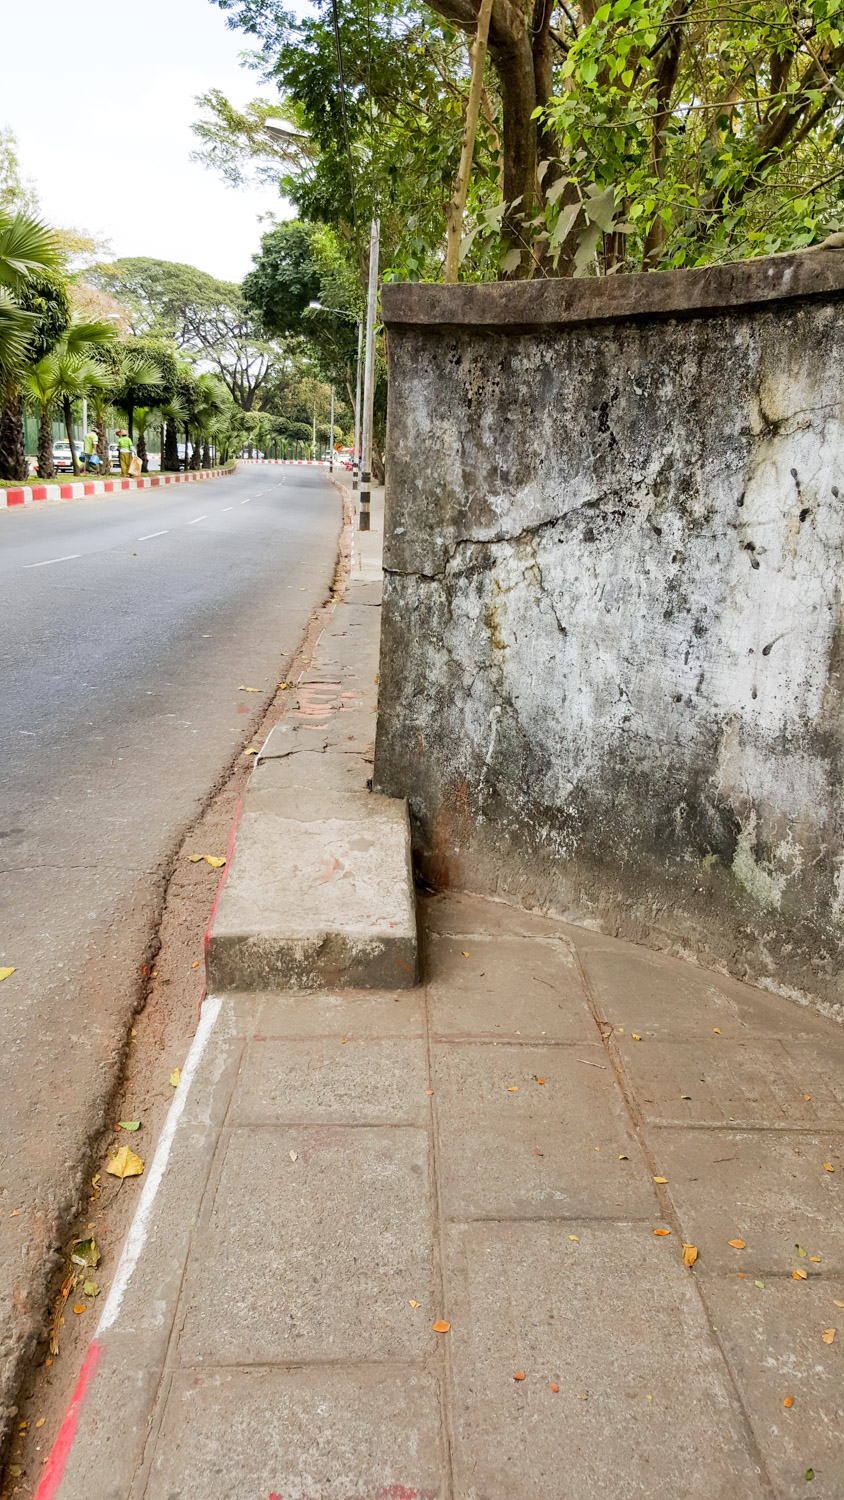 I was walking along a perfectly useful path next to a very busy road, when suddenly it decided to change into a tiny ledge.